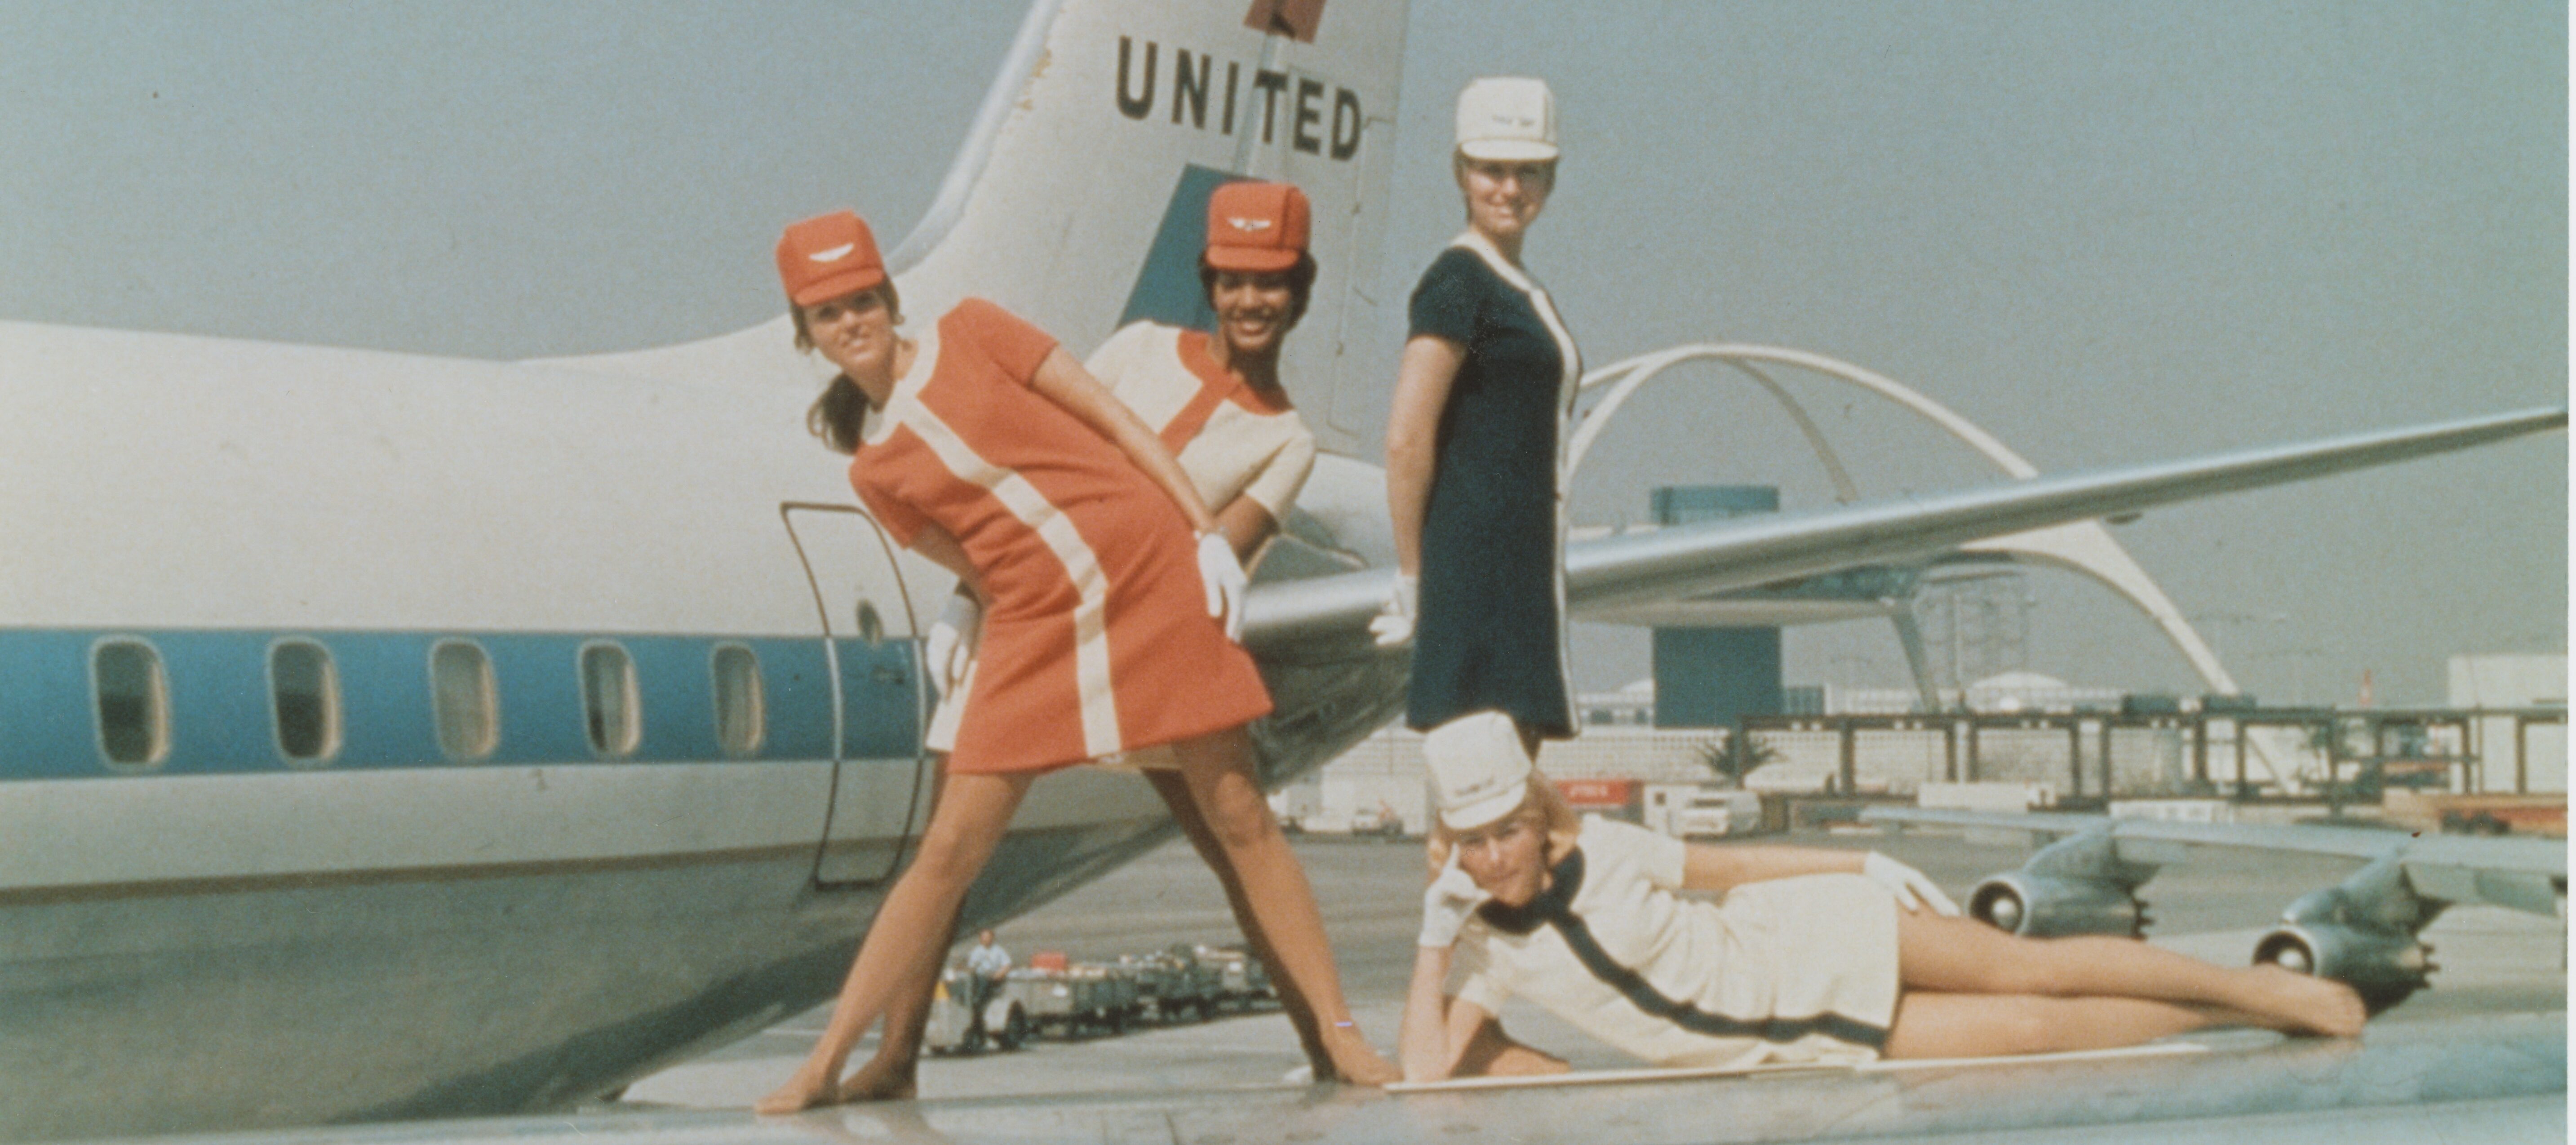 Four women flight attendants pose on the wings of a United Airlines plane in the 1960s.